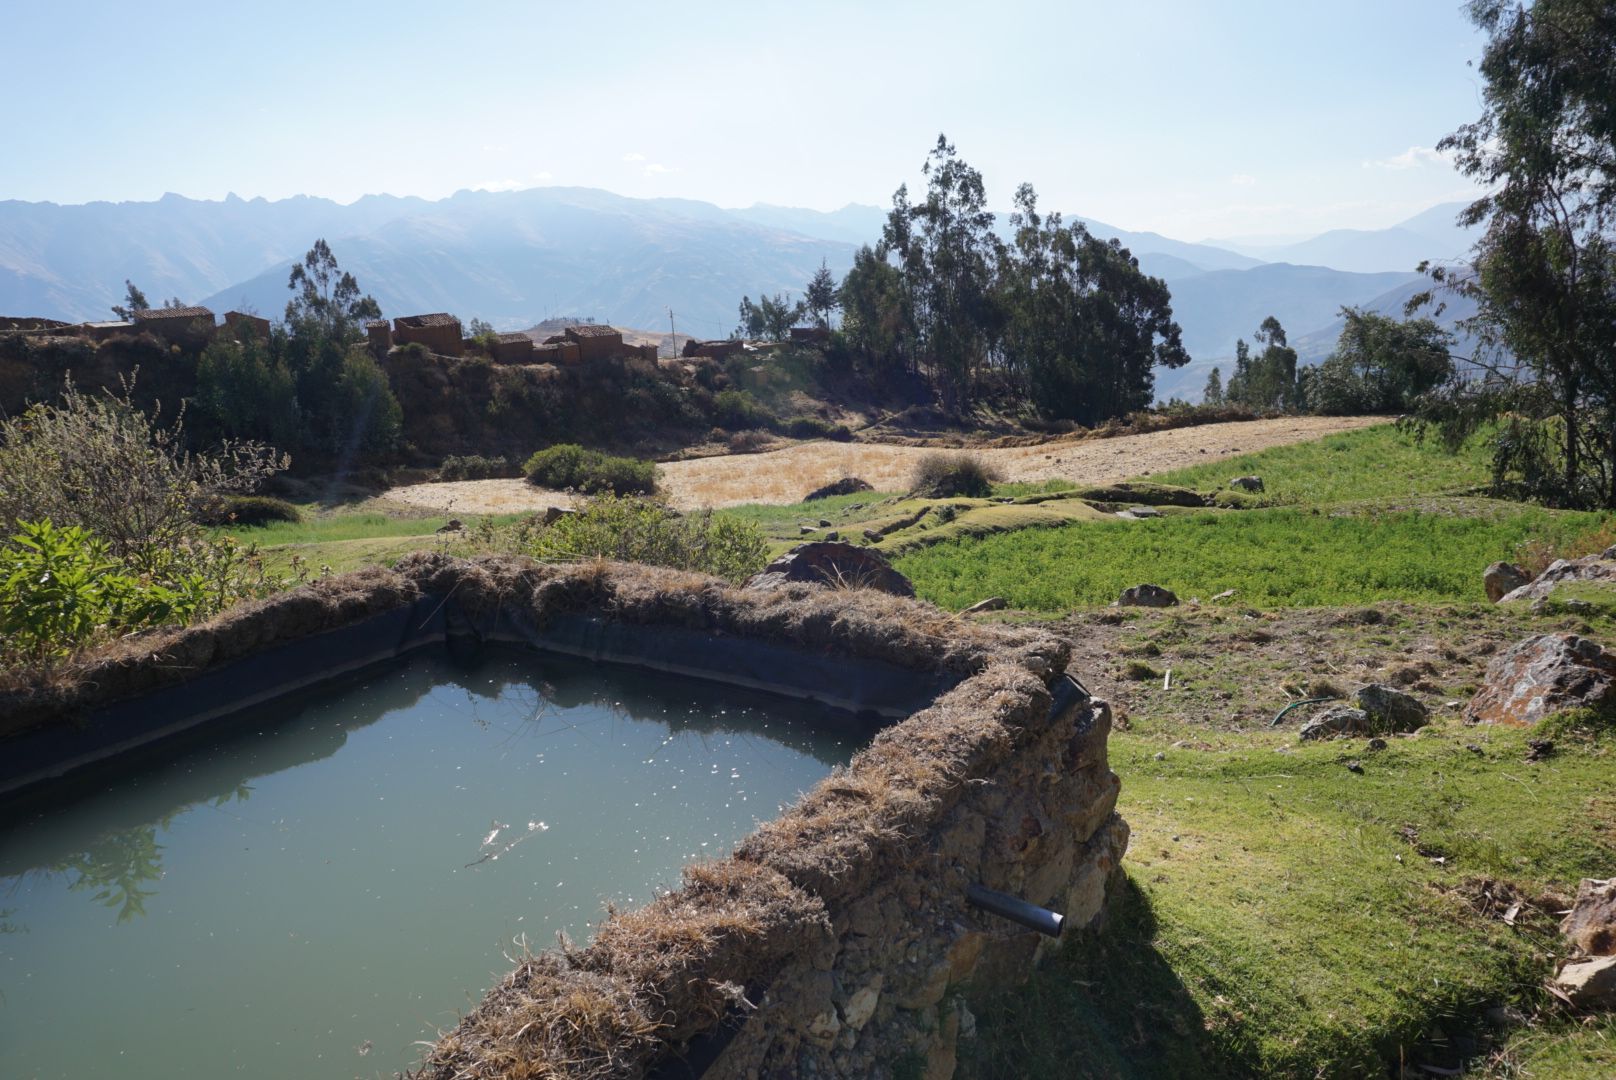 The reservoir at the top of the Oros family's land. Image by Audrey Fromson. Peru, 2019.